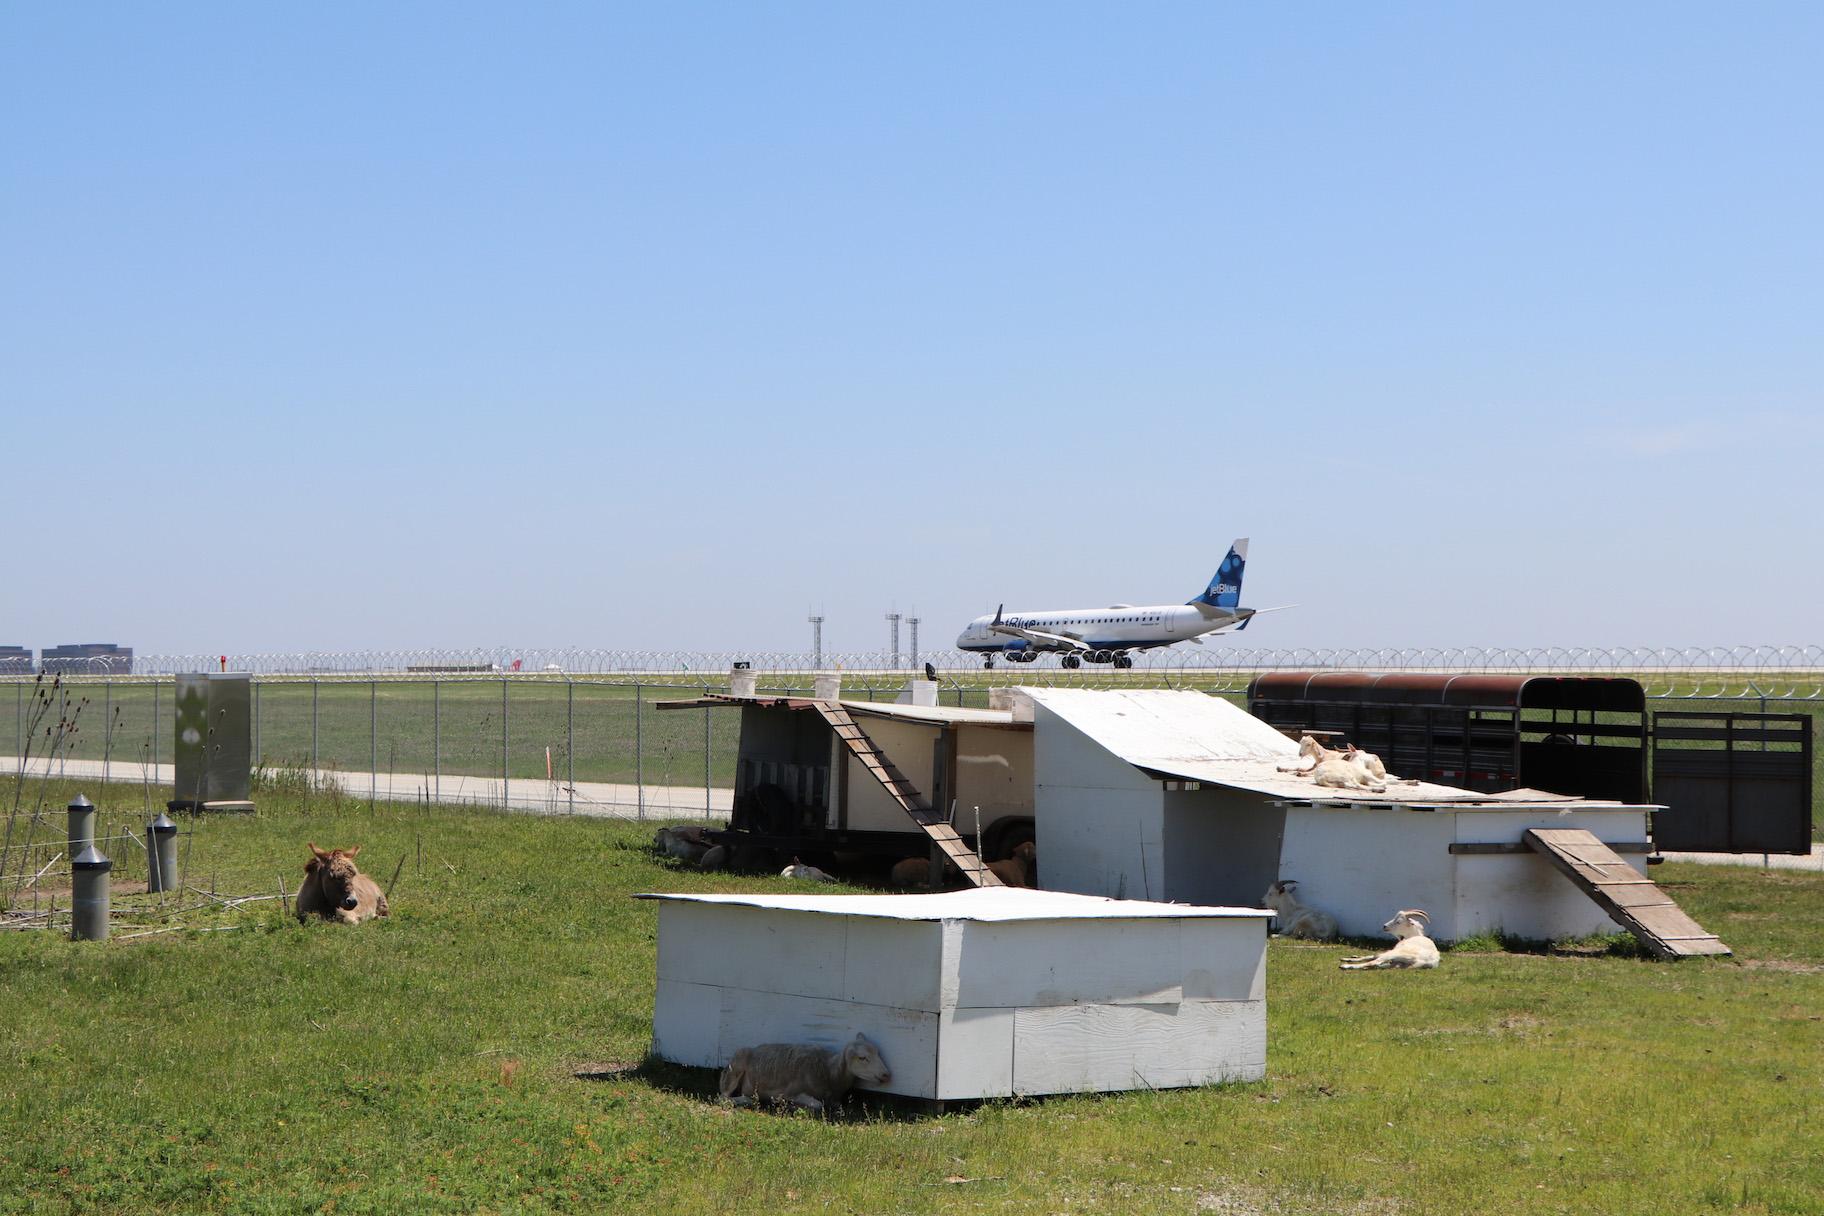 O’Hare’s herd of grazing animals rest while an airplane prepares for takeoff in the distance. (Evan Garcia / WTTW)